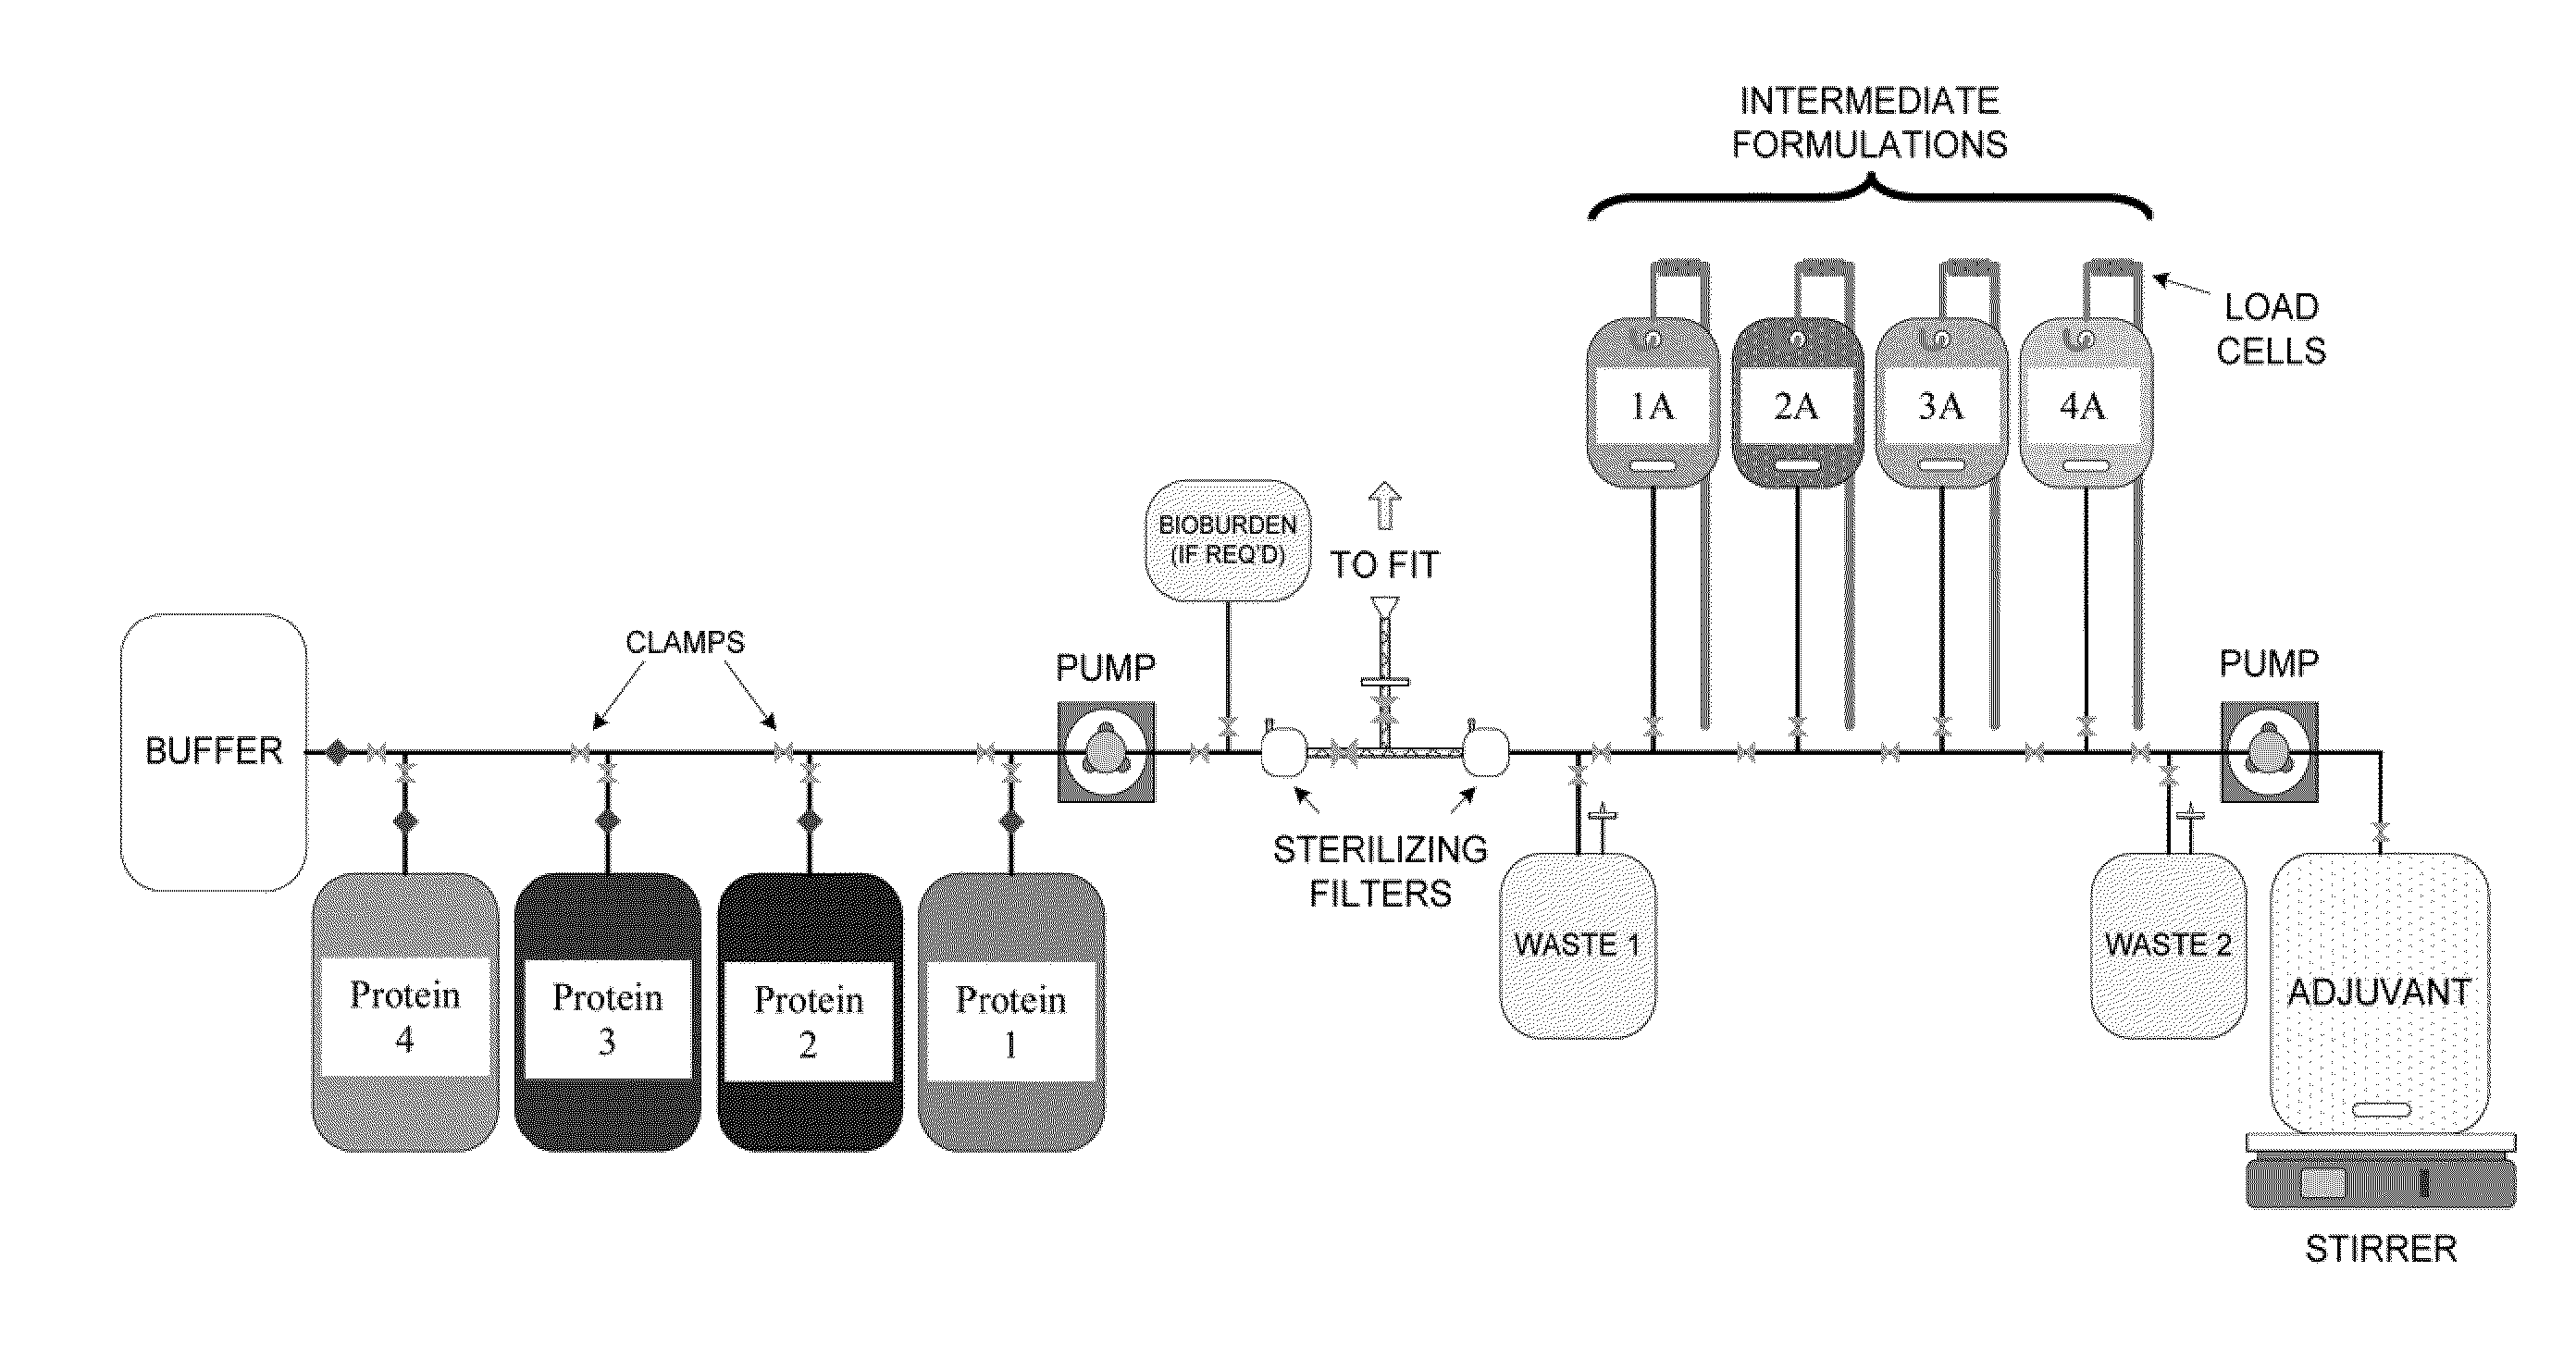 System and process for producing multi-component biopharmaceuticals